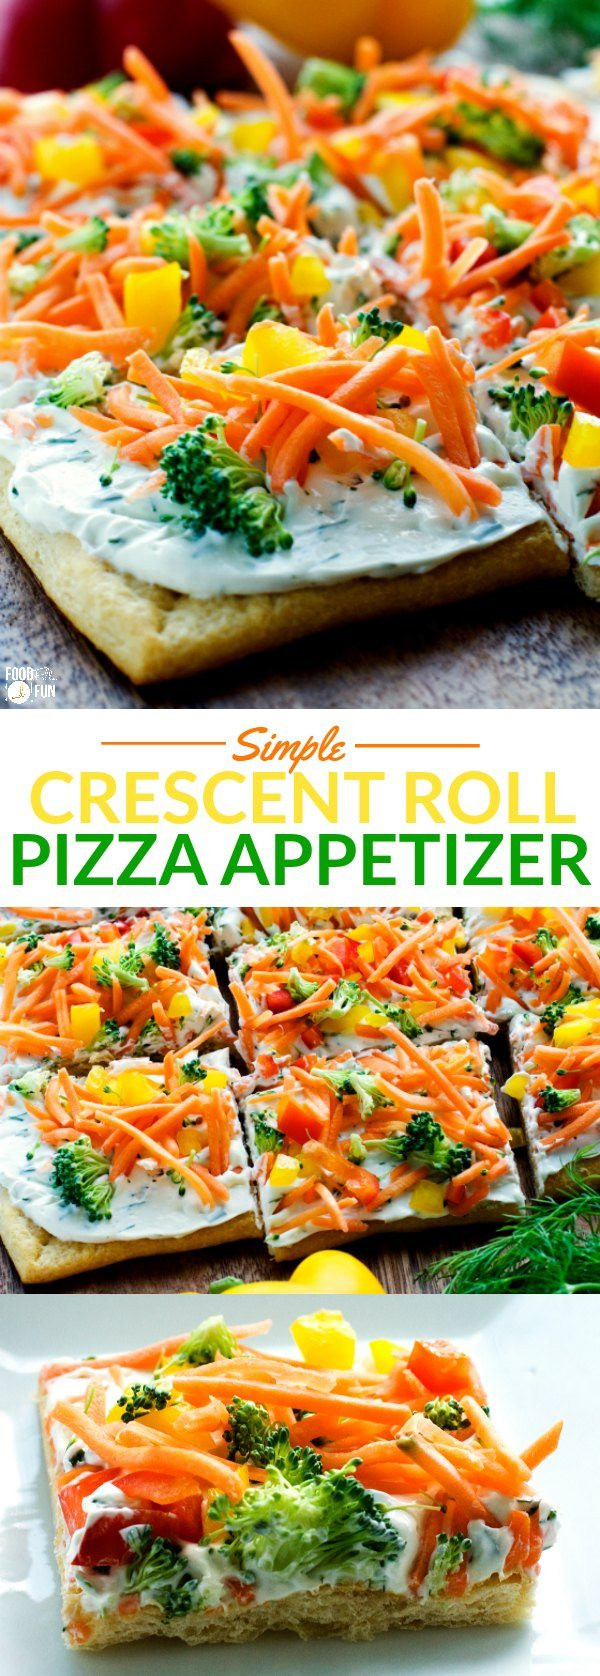 Crescent Rolls Appetizers
 Simple Crescent Roll Pizza Appetizer • Food Folks and Fun